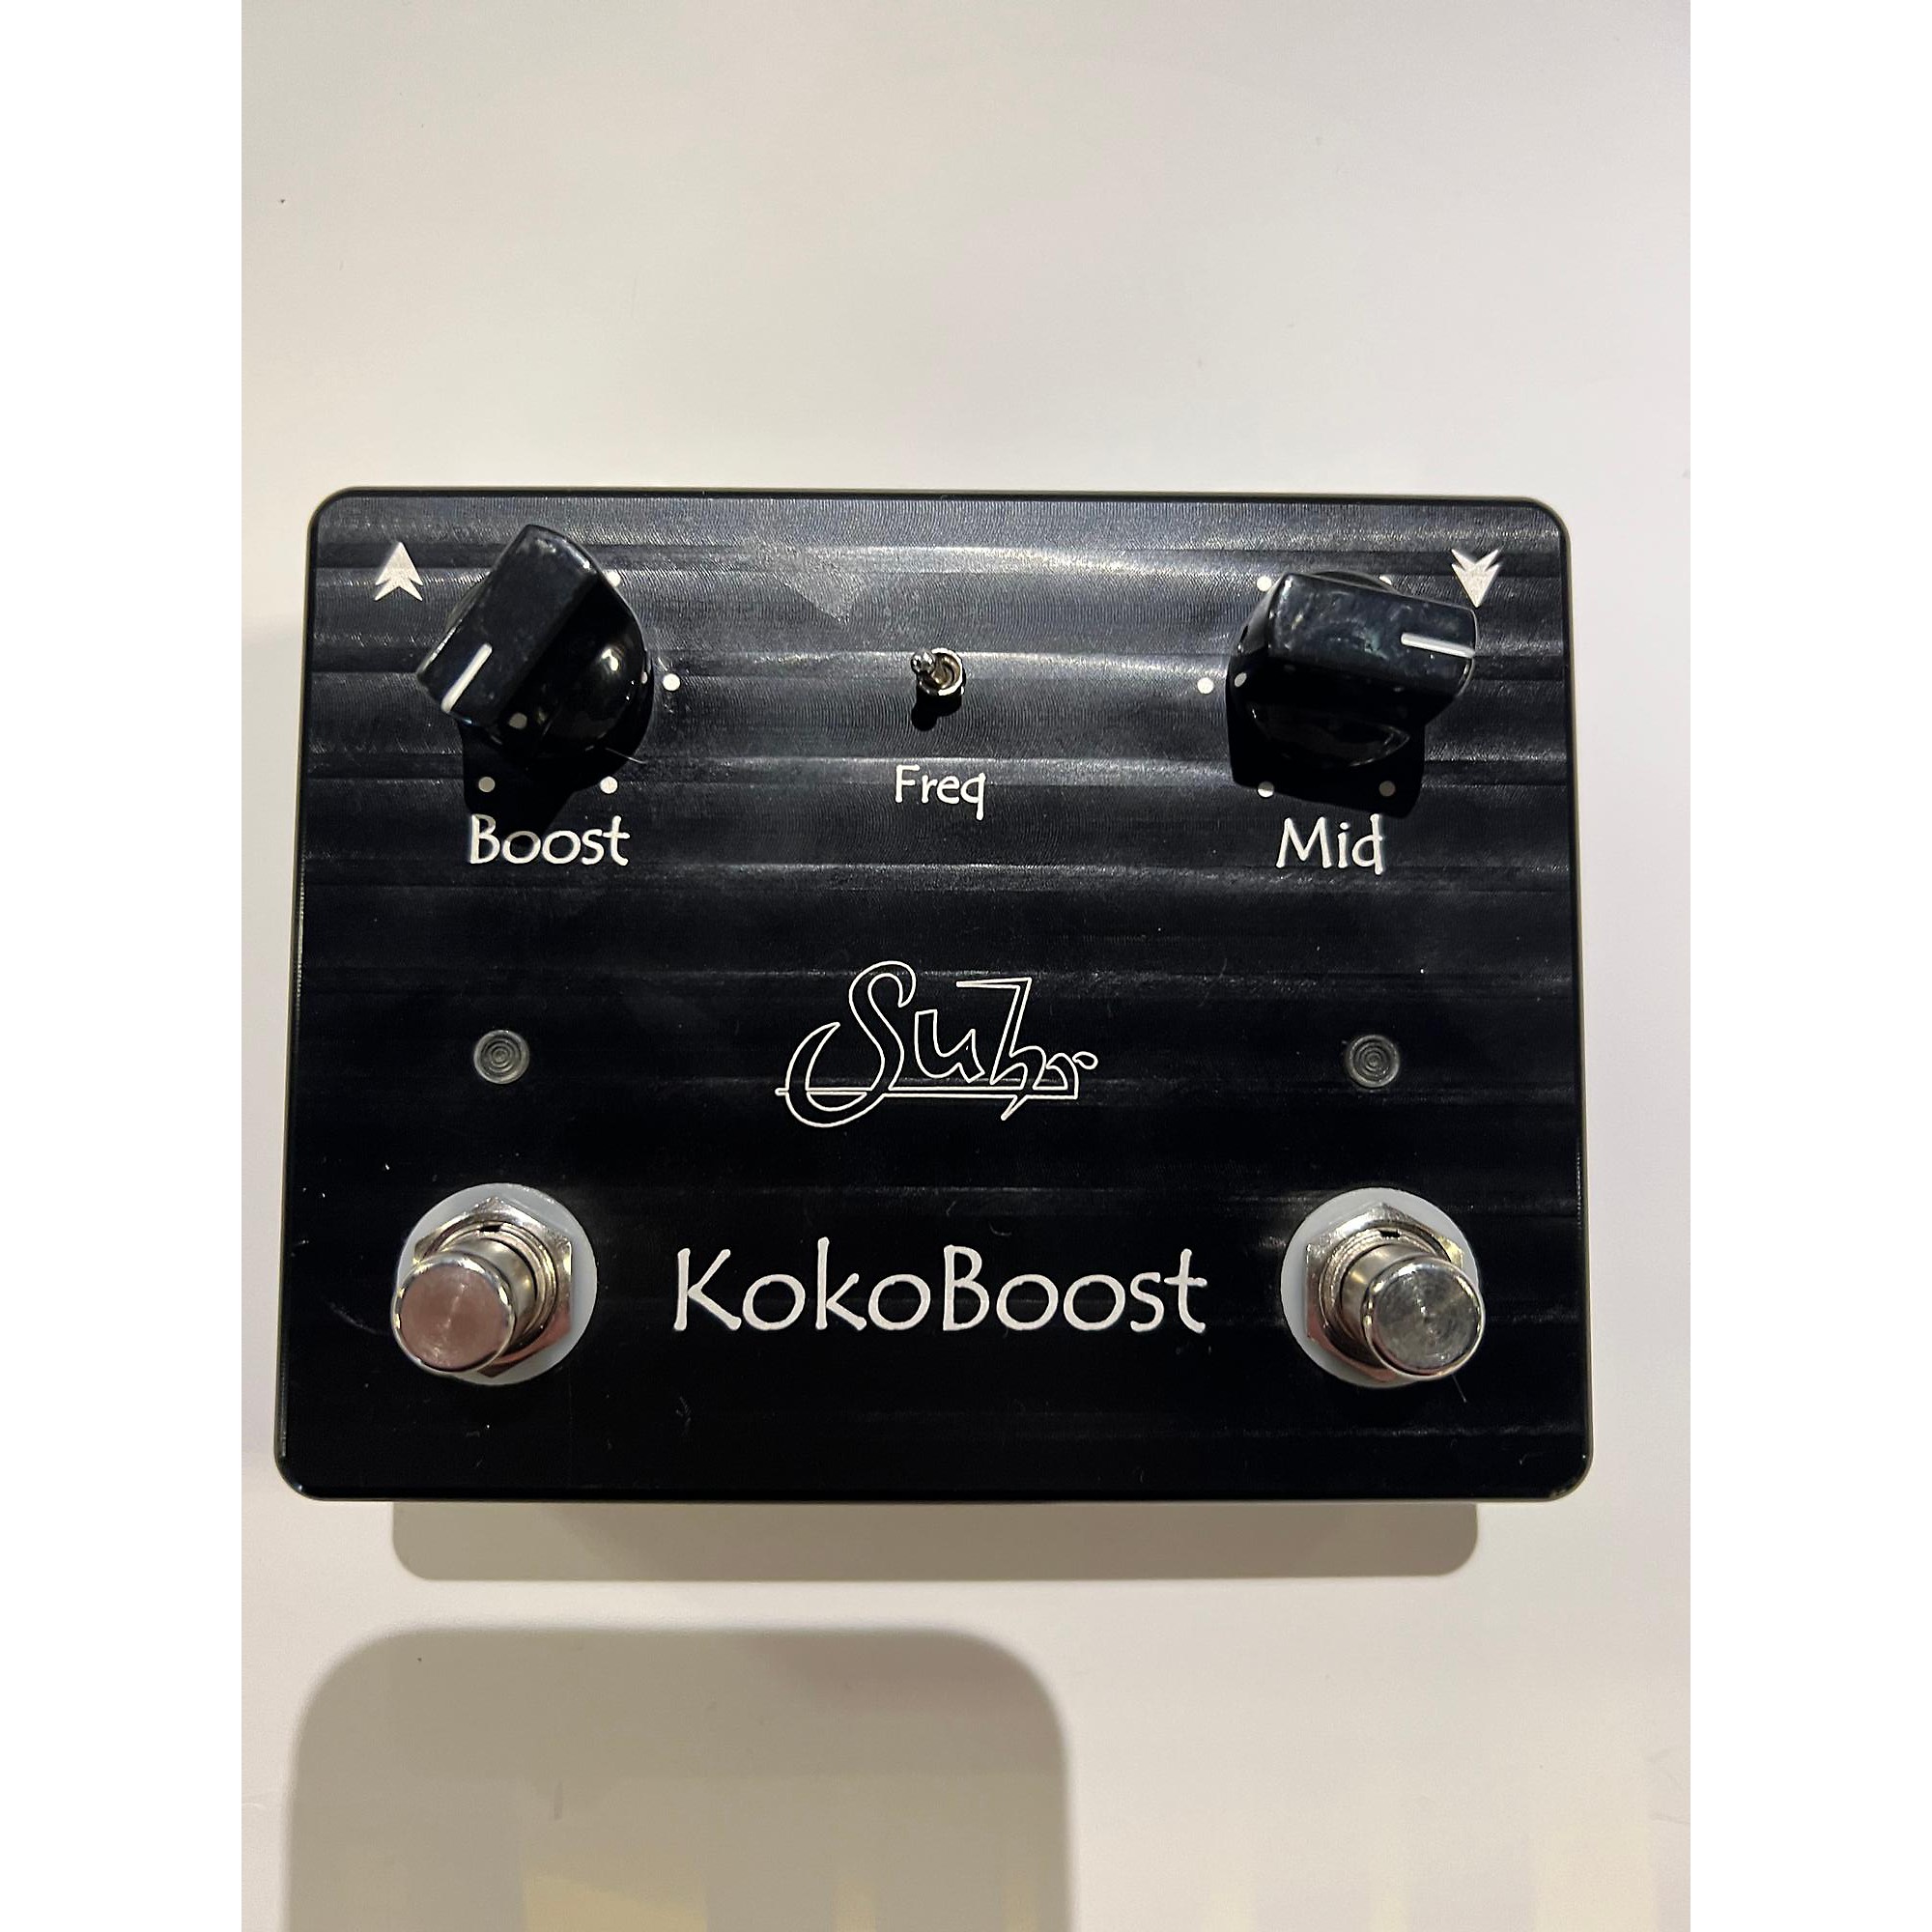 SUHR Koko Reloaded Clean Mid Range Boost Pedal